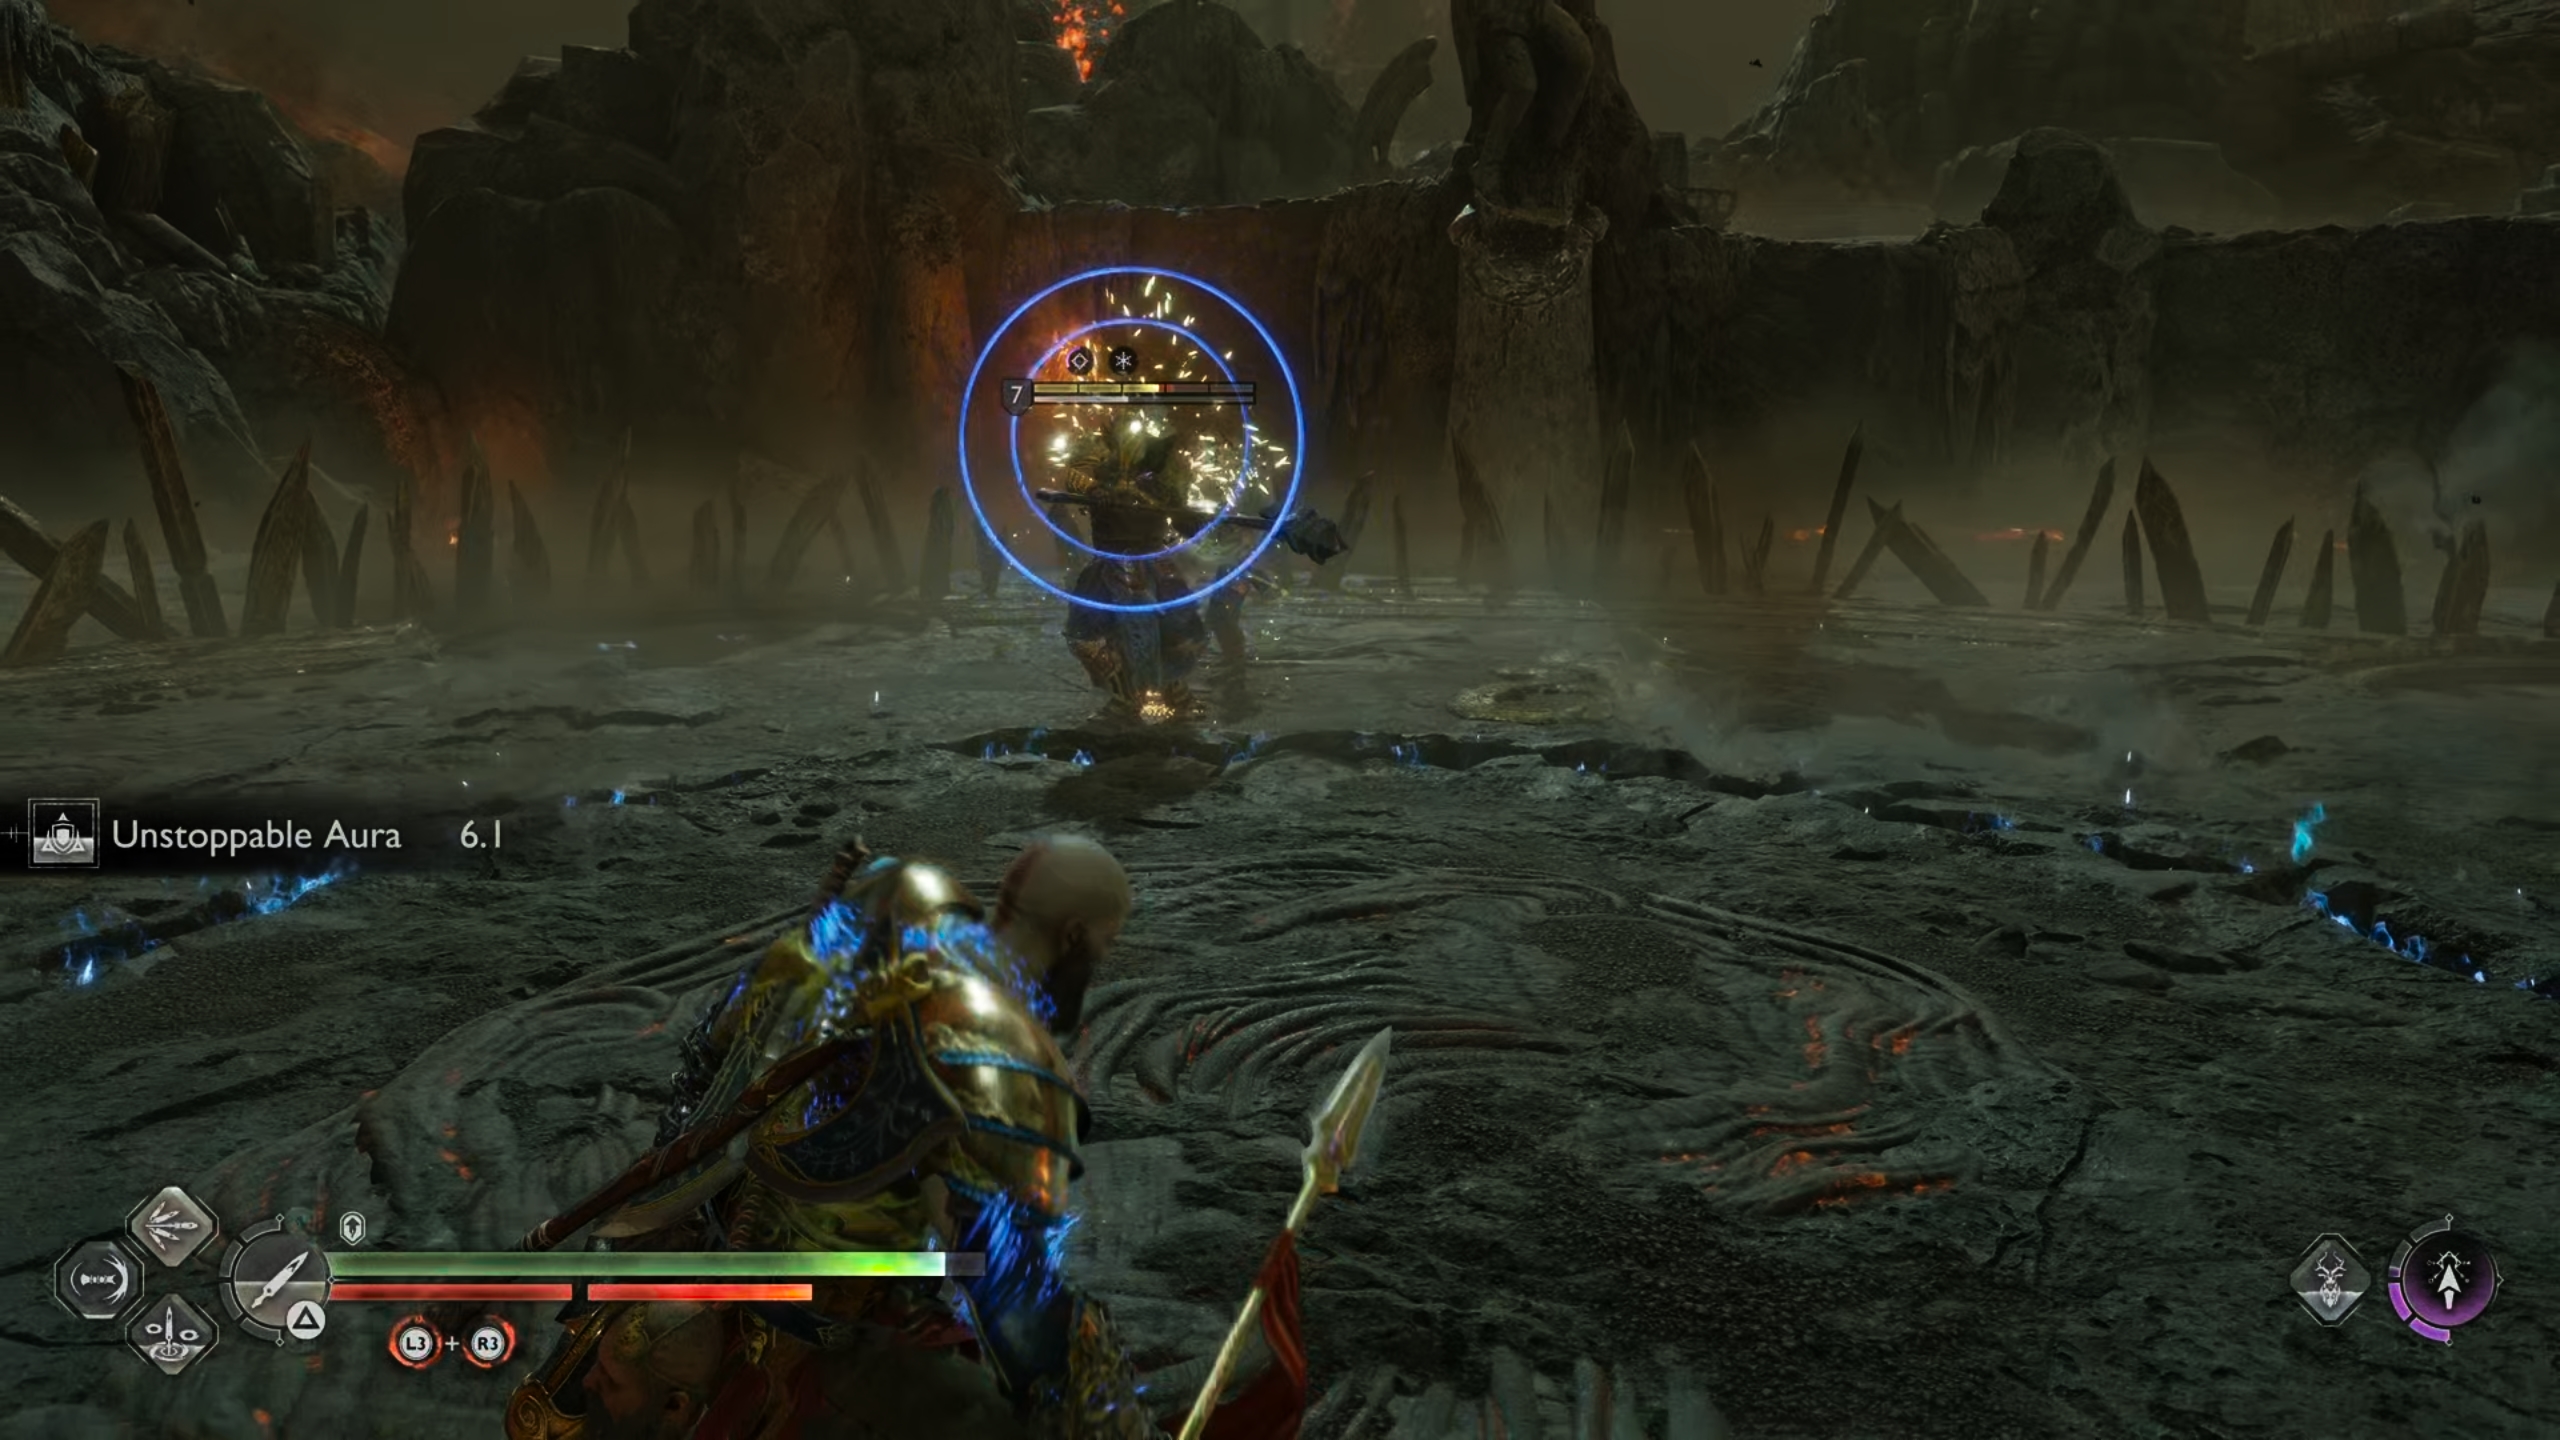 Only a shield attack by double tapping L1 will interrupt concentric blue ring attacks.